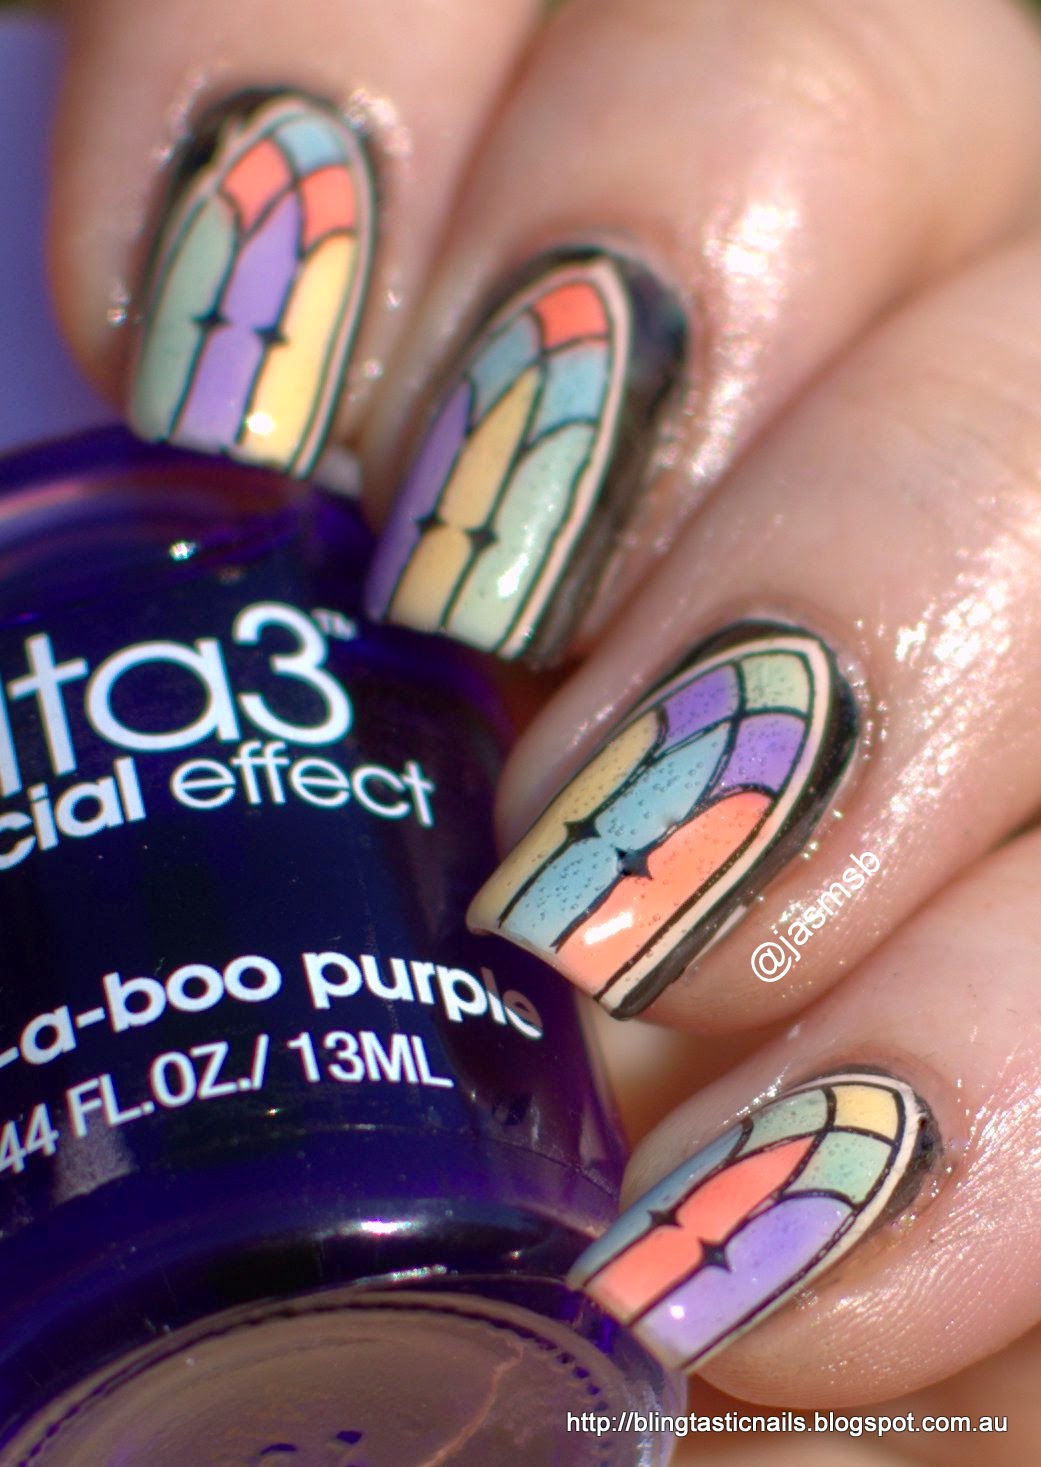 Ulta3 Watercolor Sheer Polish Stained Glass Window Nails